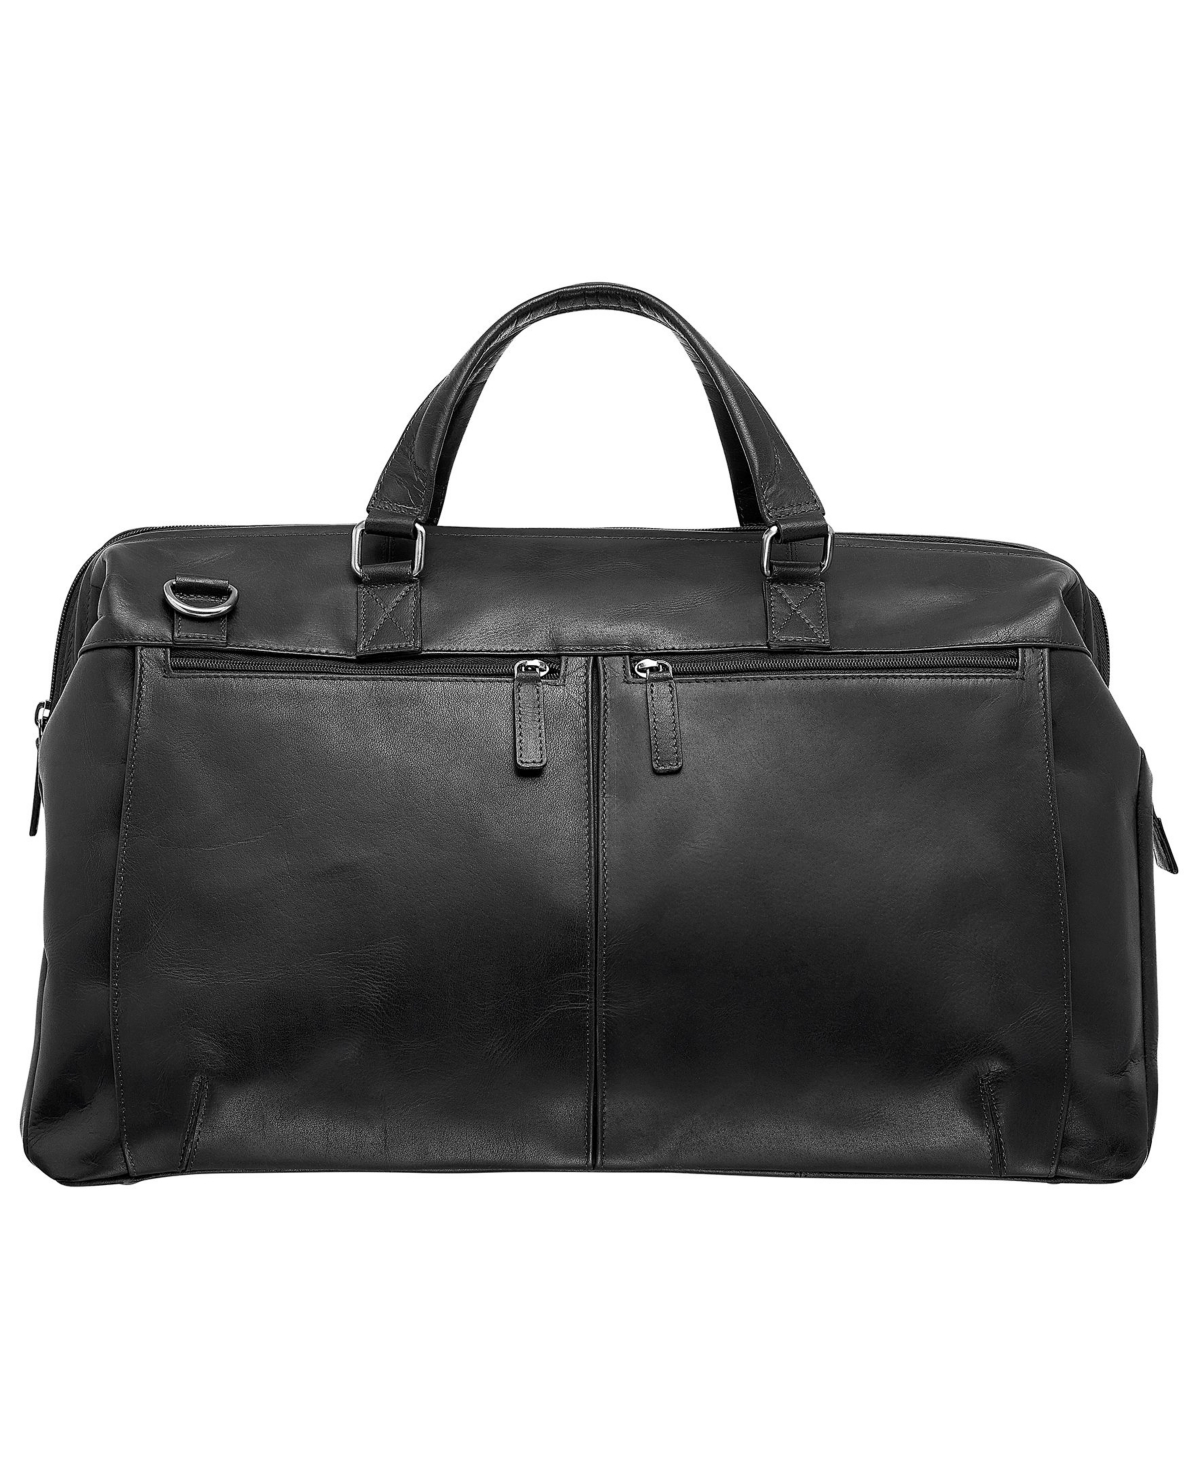 Men's Carry-On Duffle Bag - Brown